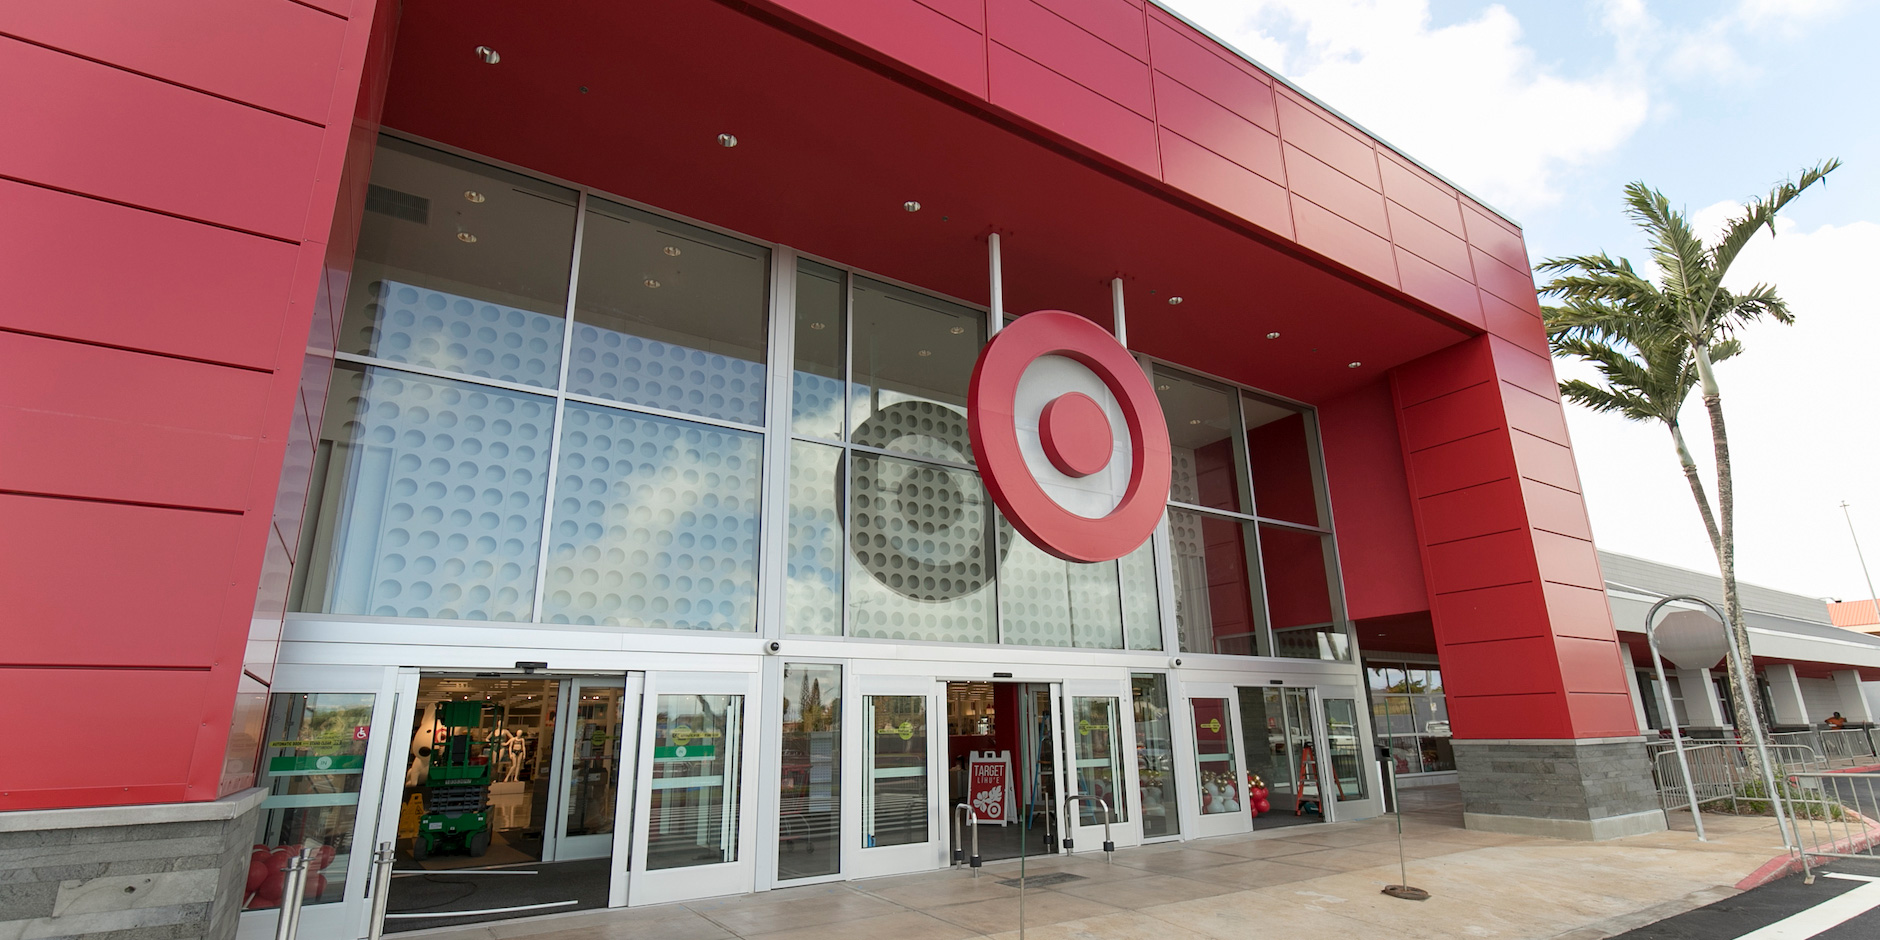 Does Target take Apple Pay?